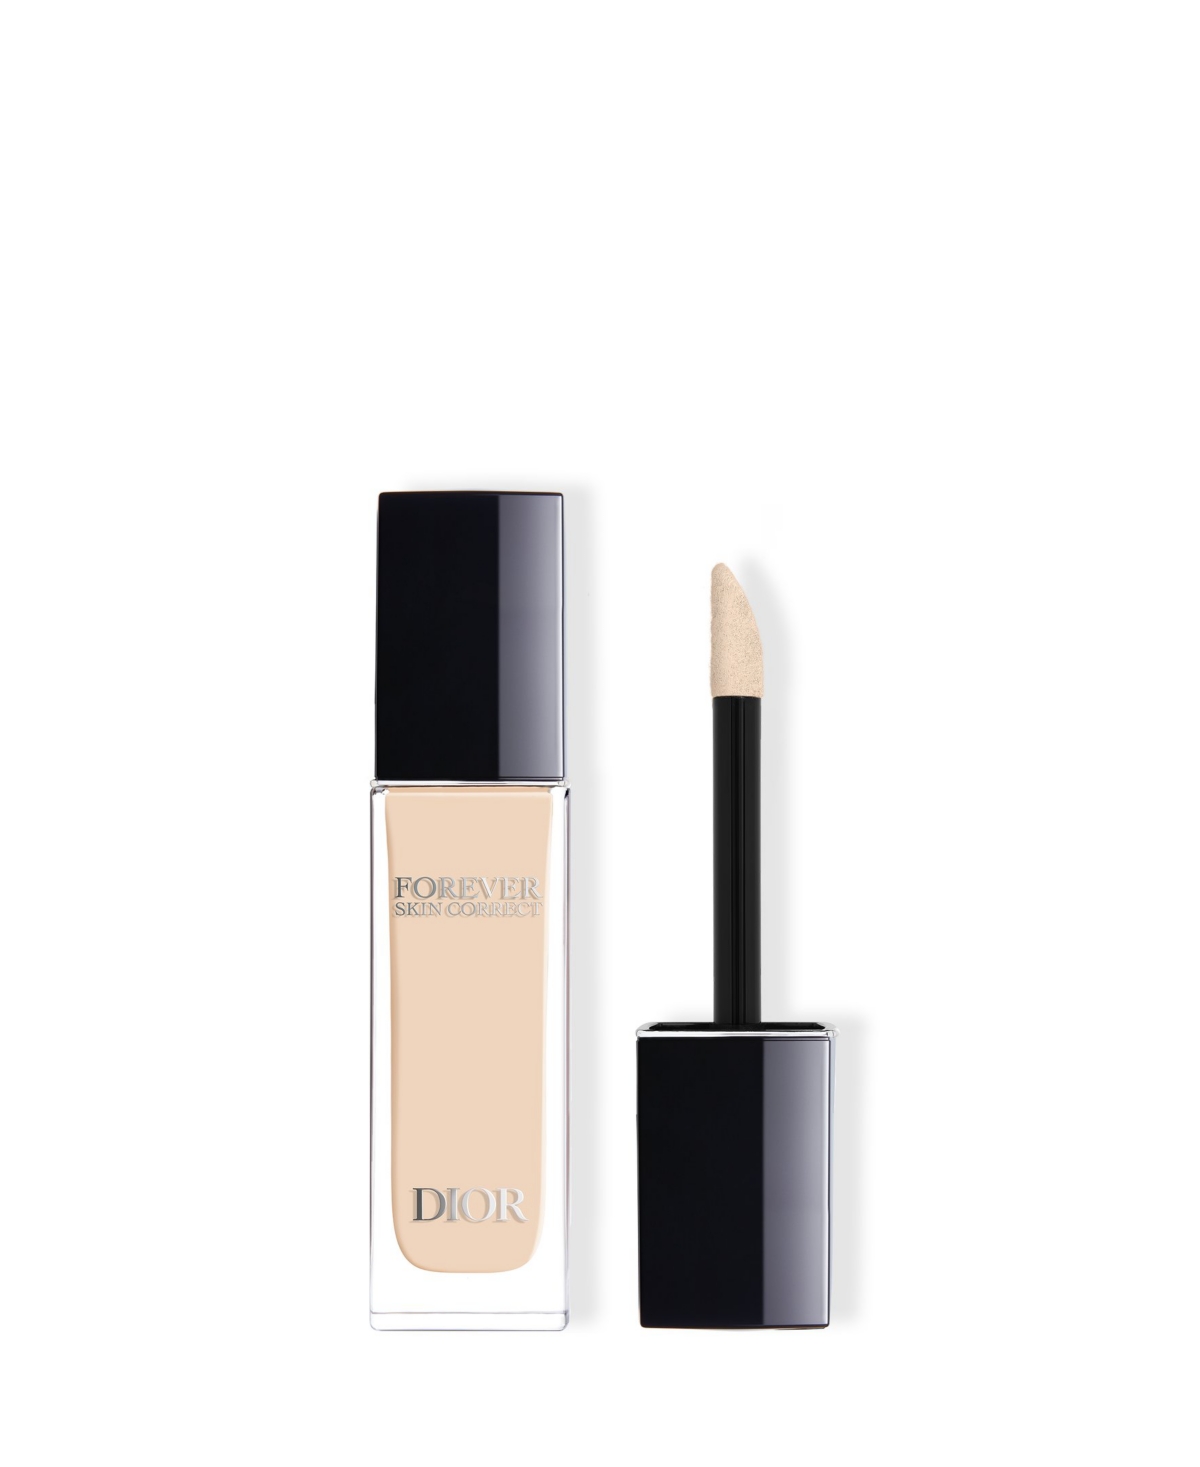 Dior Forever Skin Correct Full-coverage Concealer In N Neutral (very Light Skin With Neutral